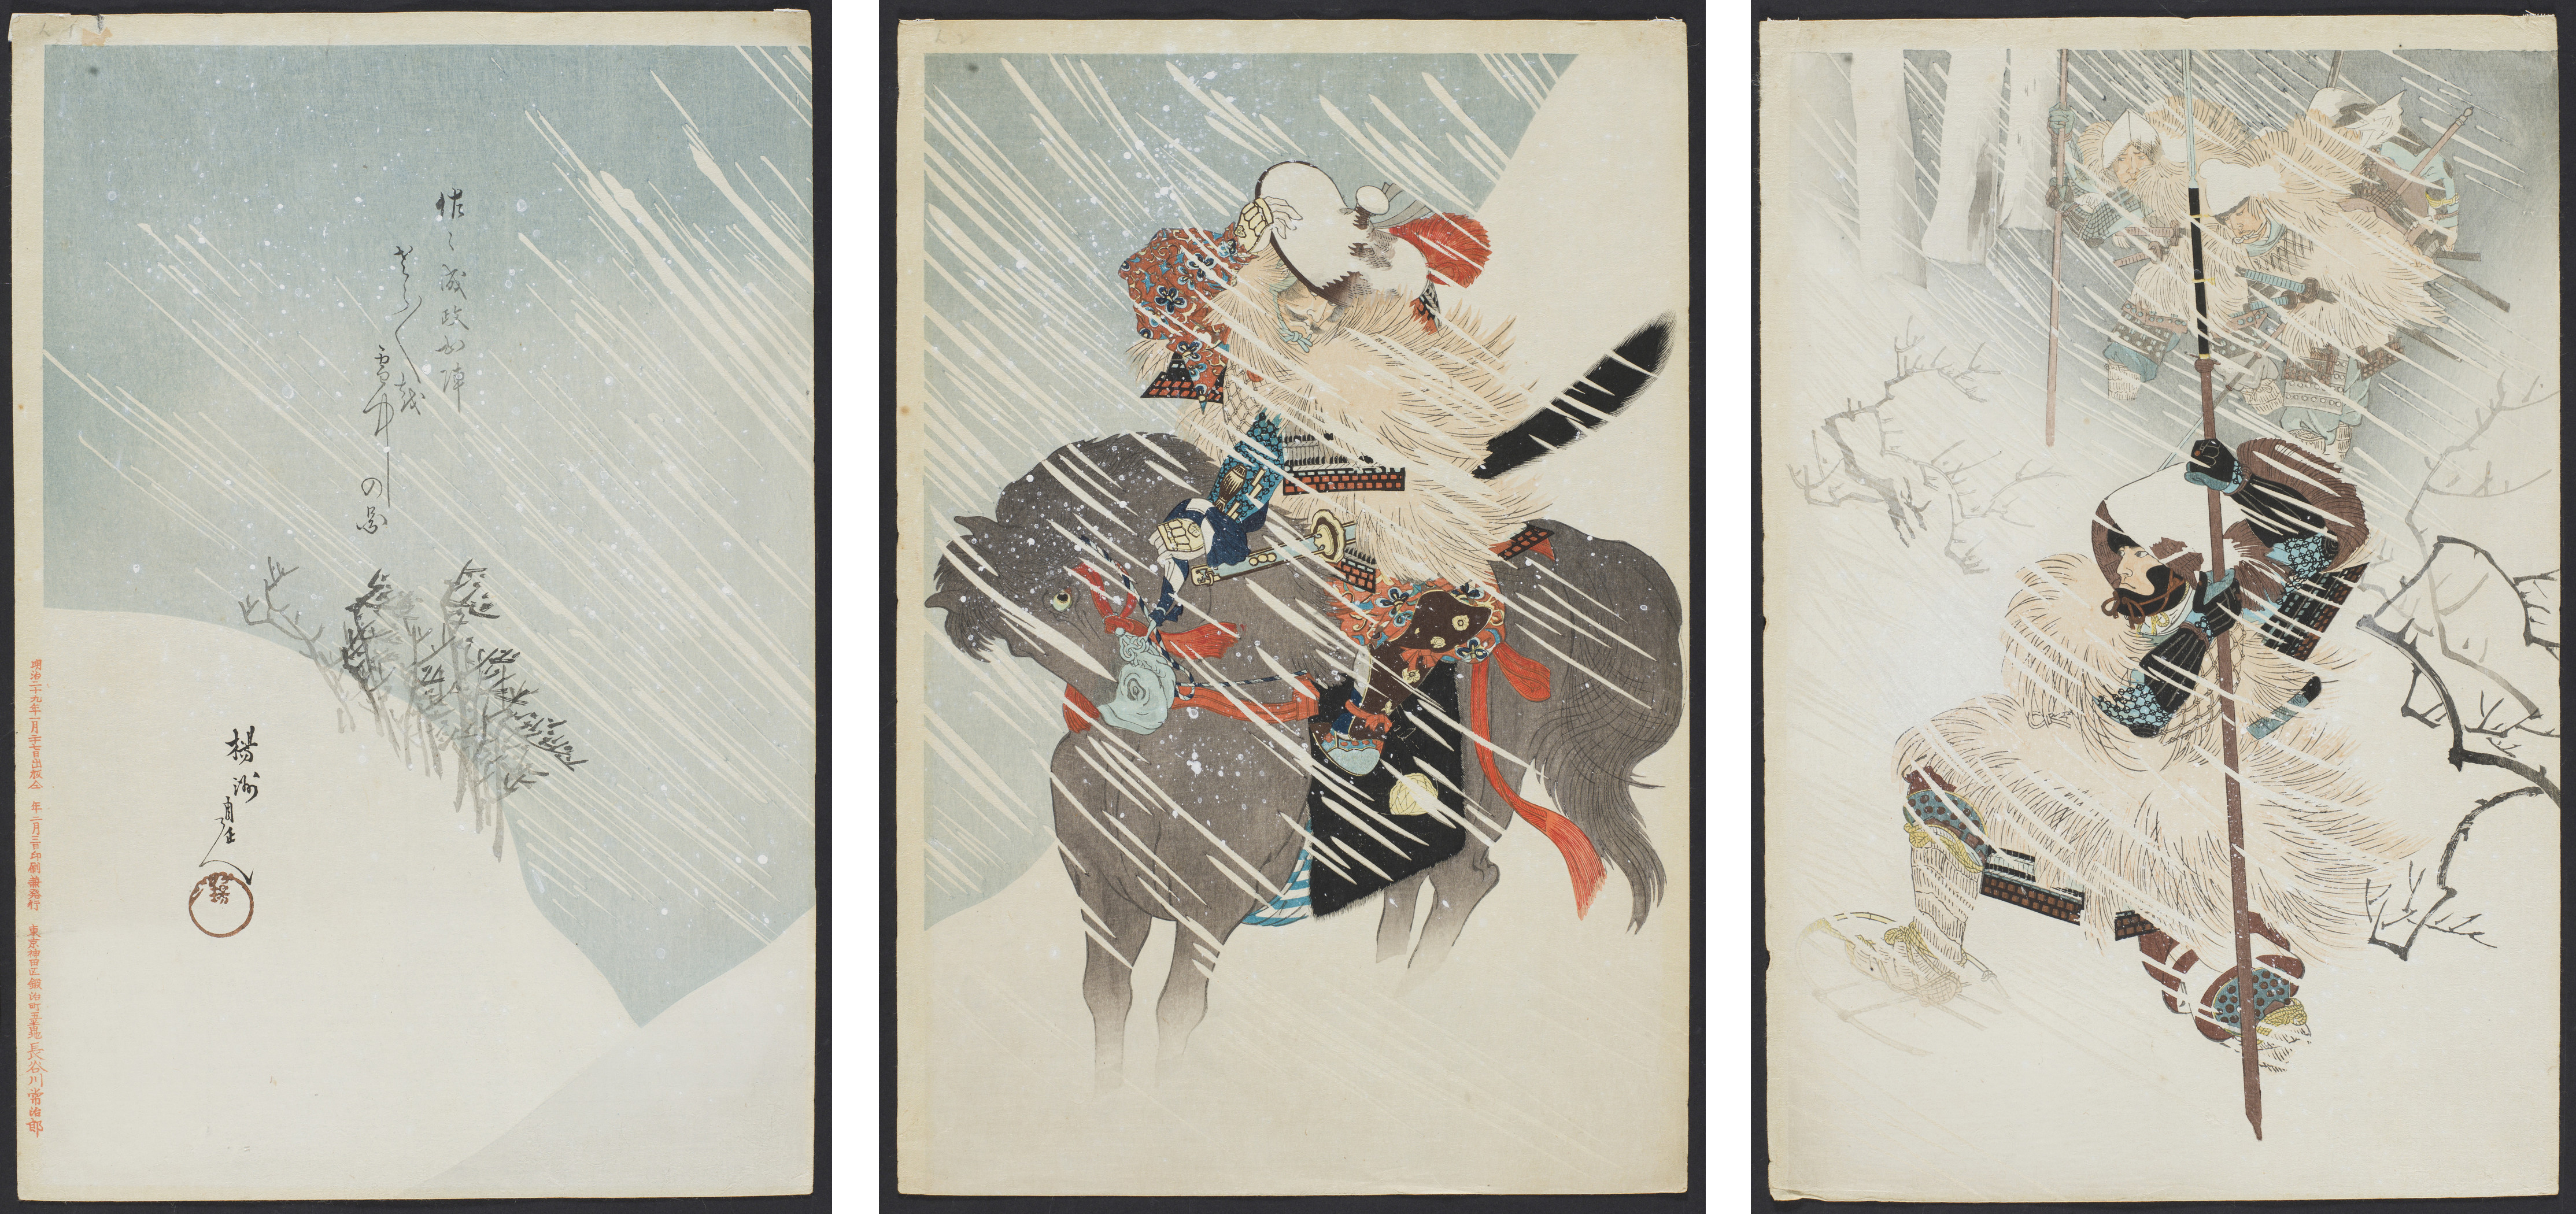 (All three images) Toyohara (Yōshū) Chikanobu, Warriors in a Blizzard, 1896, Los Angeles County Museum of Art, gift of Beverly and Stuart Denenberg, photo © Museum Associates/LACMA